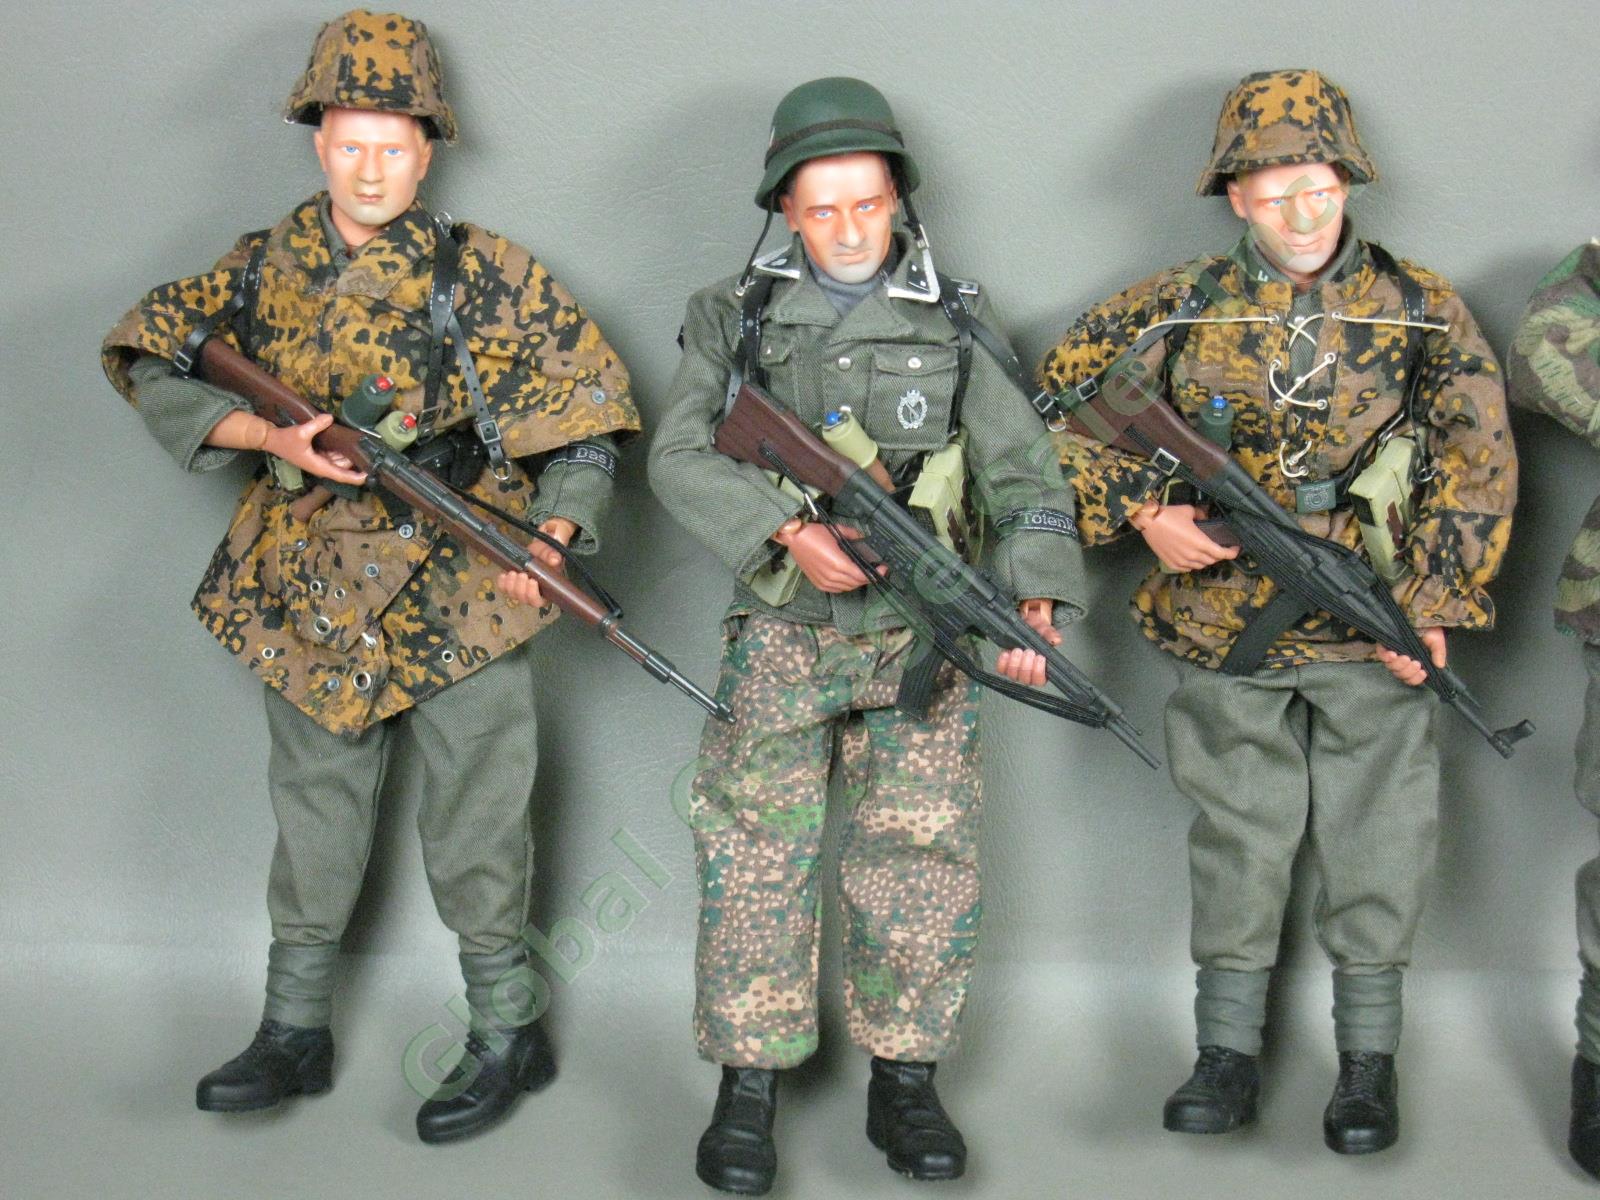 6 Dragon 1/6 Scale 12" WWII German Camo Army Soldier Figures Lot w/Accessories 1